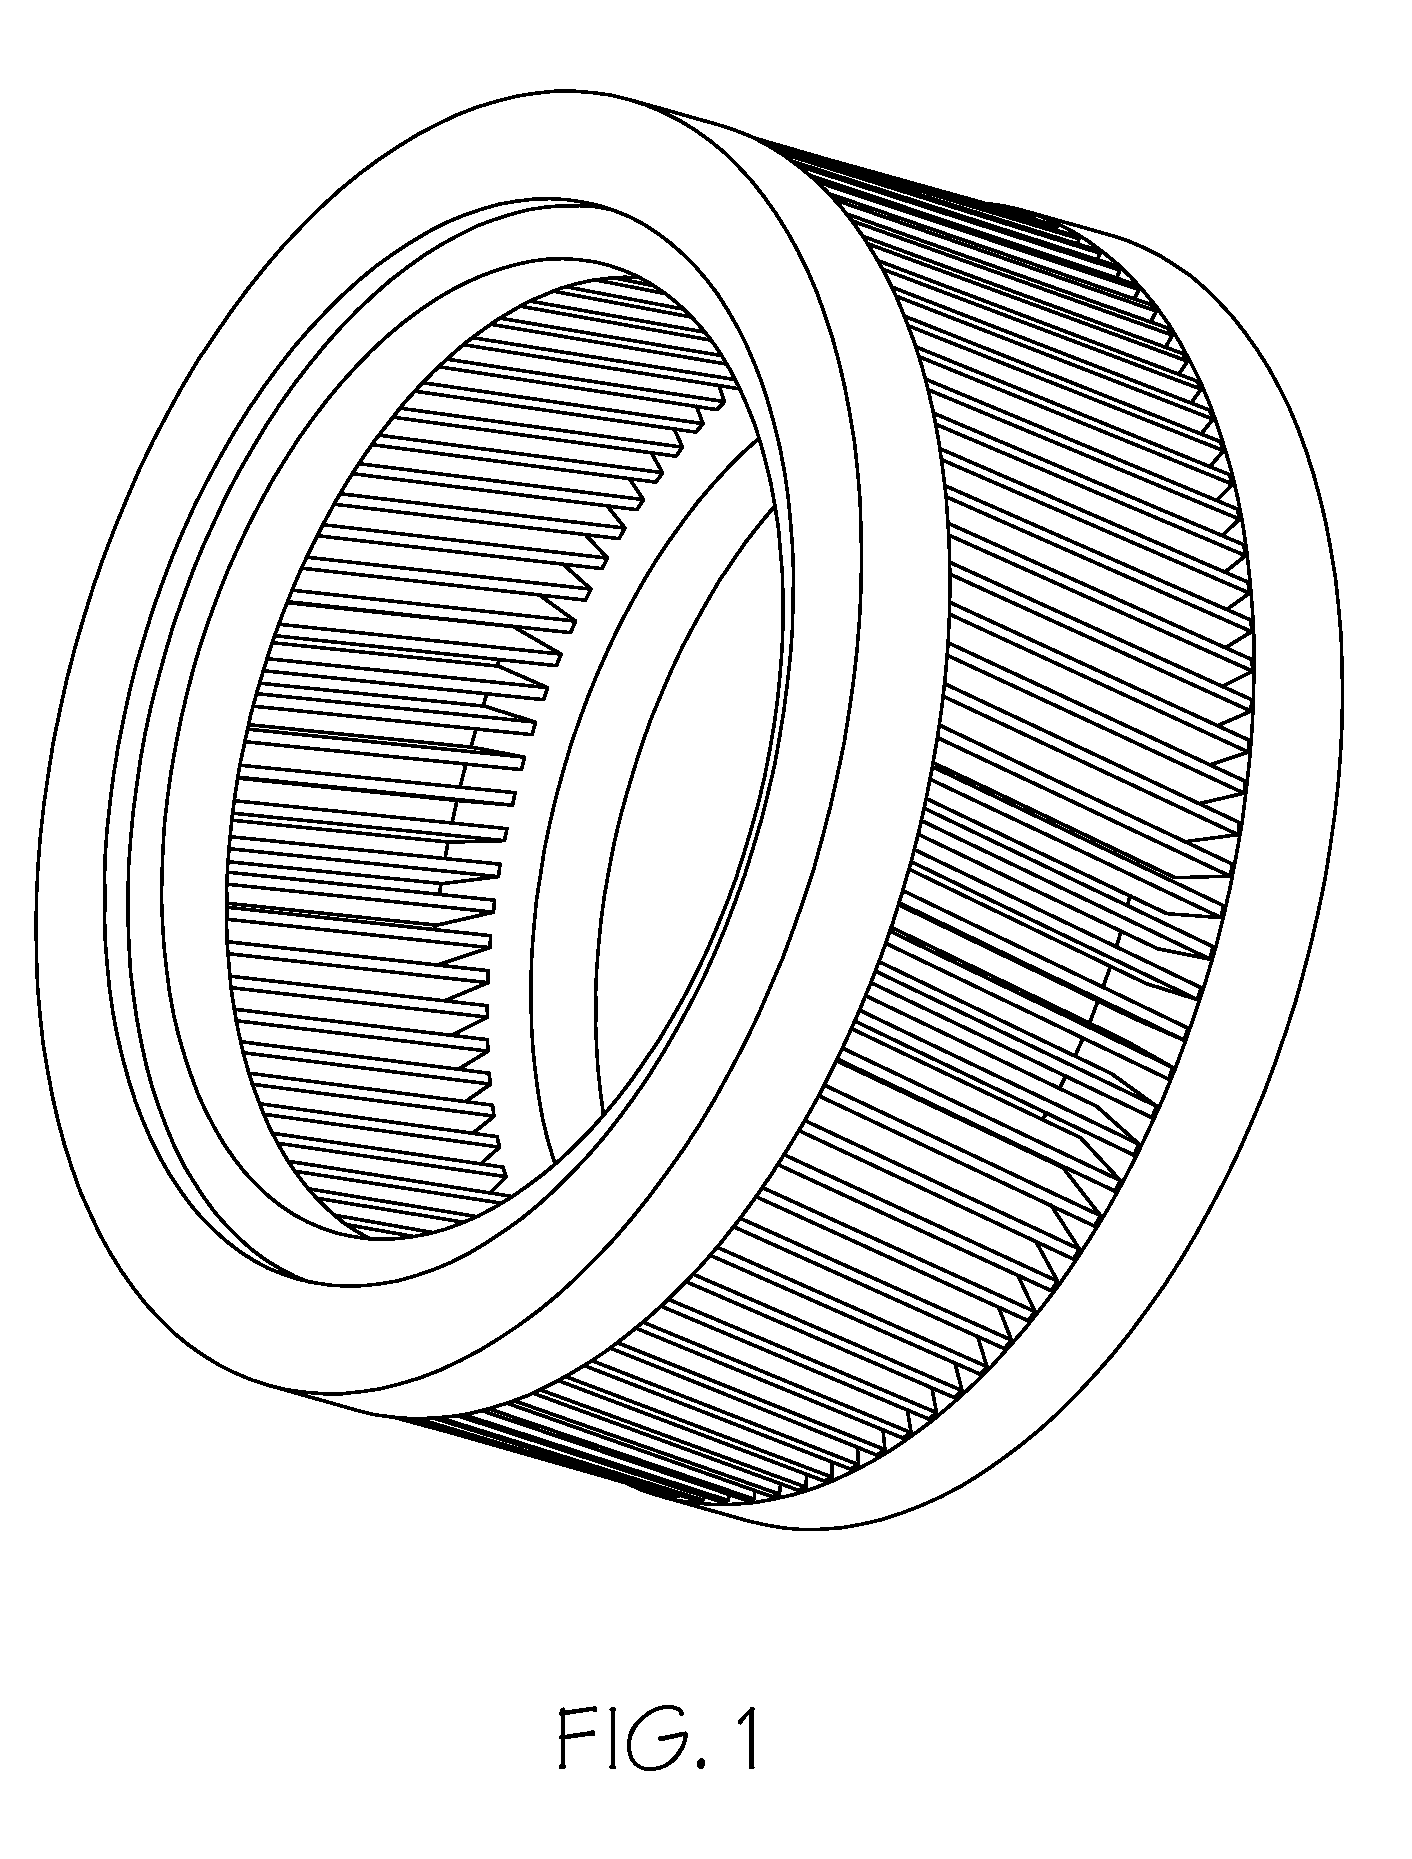 Aluminum based composite squirrel cage for induction rotor and methods of making